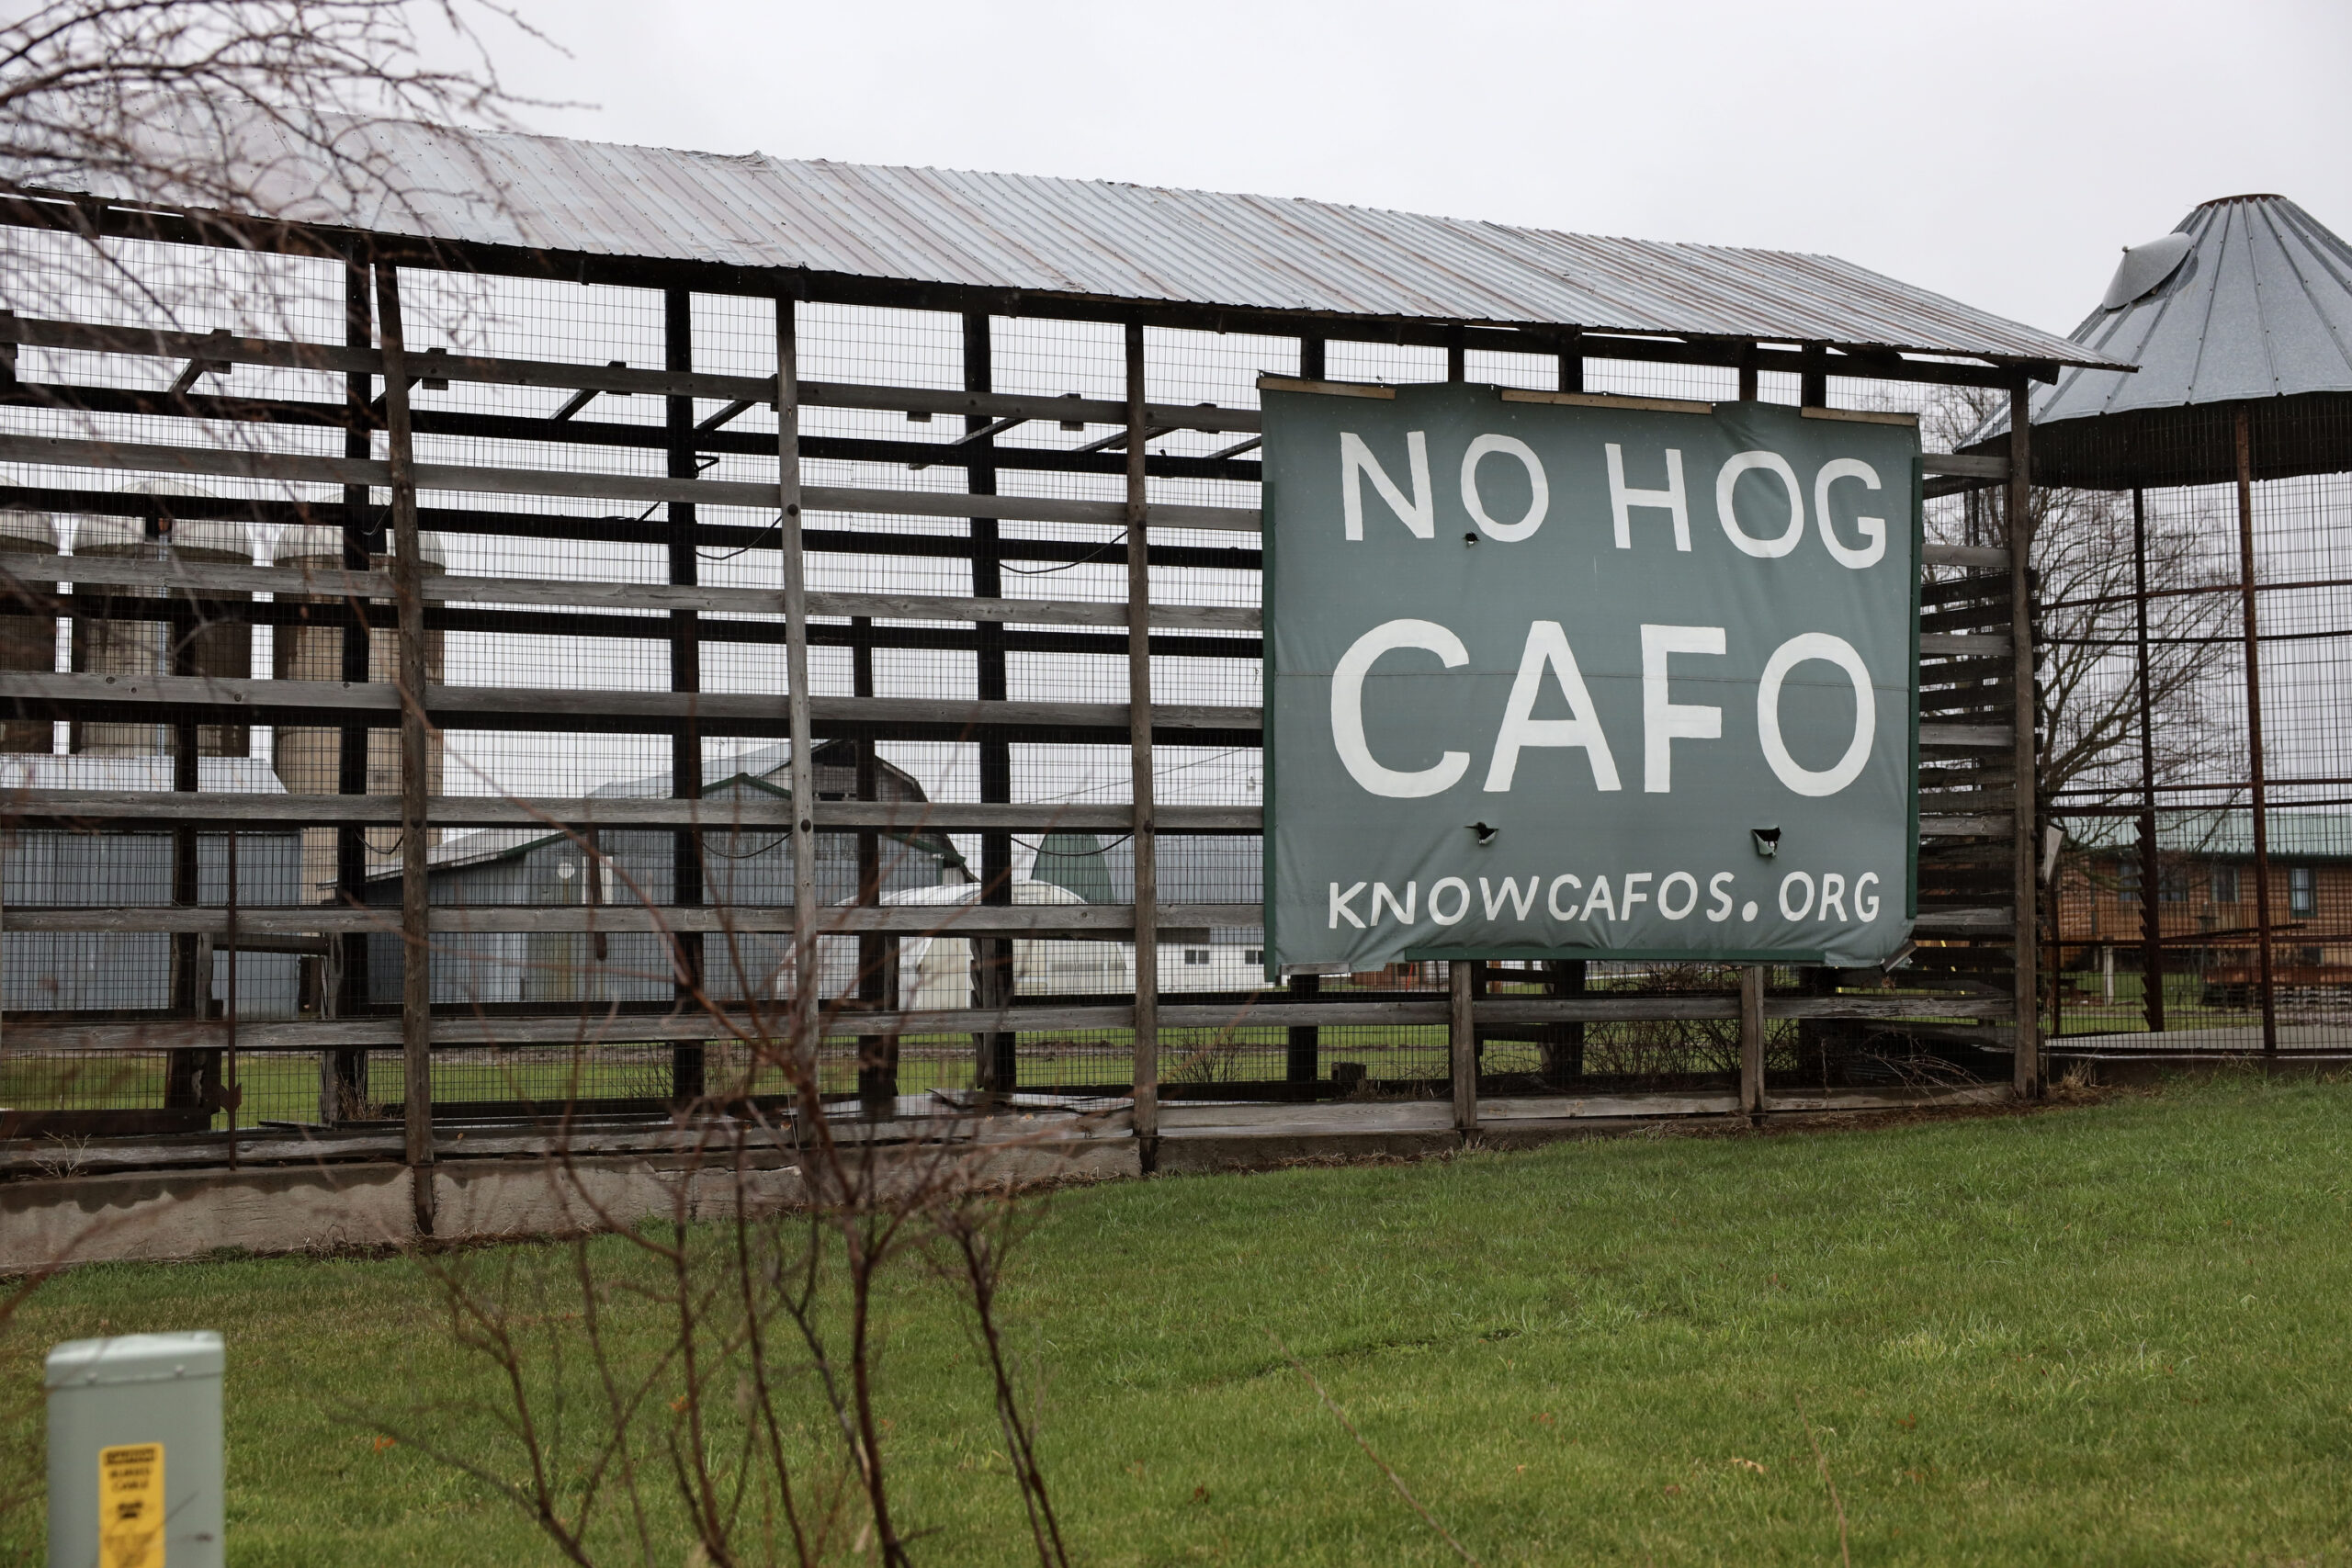 A sign reading "NO HOG CAFO" on display in the town of Trade Lake in Burnett County